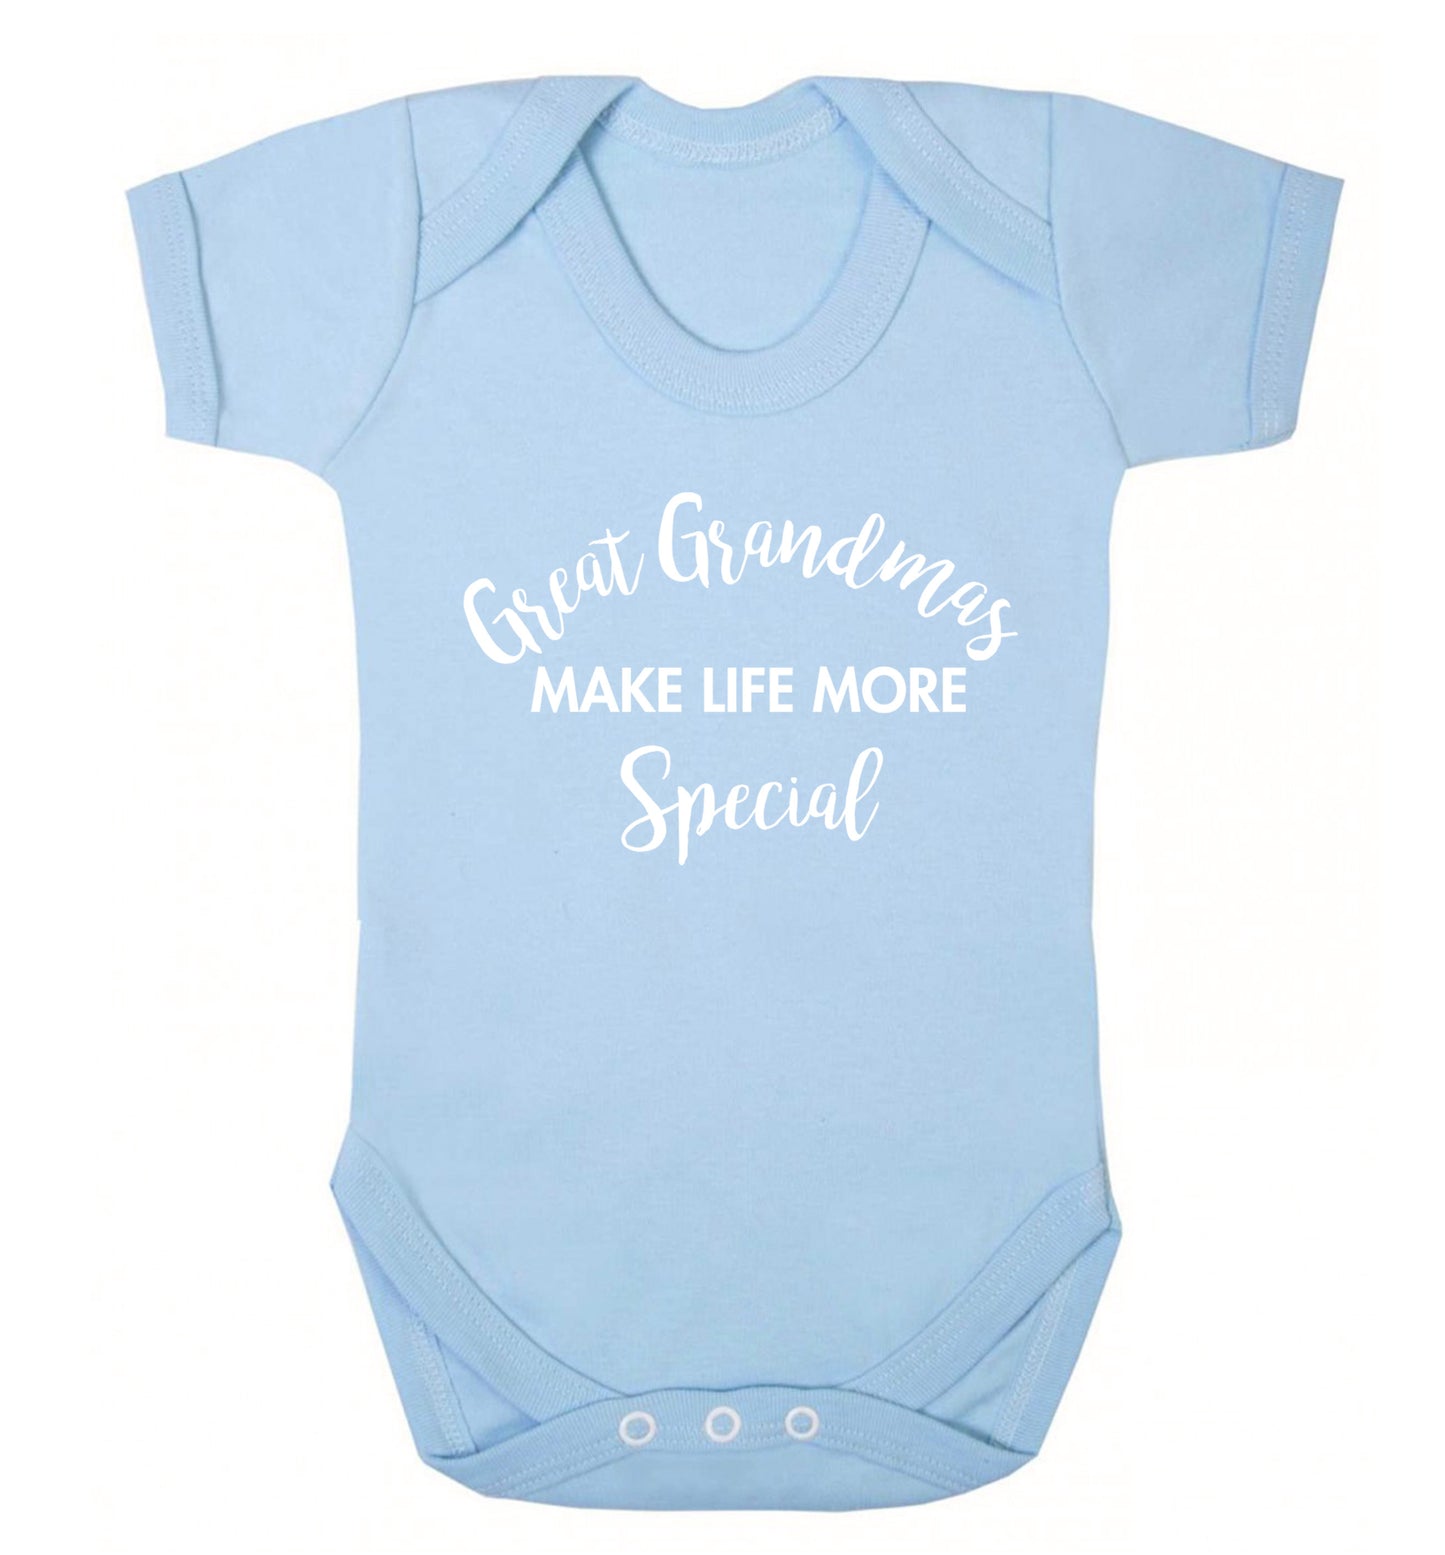 Great Grandmas make life more special Baby Vest pale blue 18-24 months